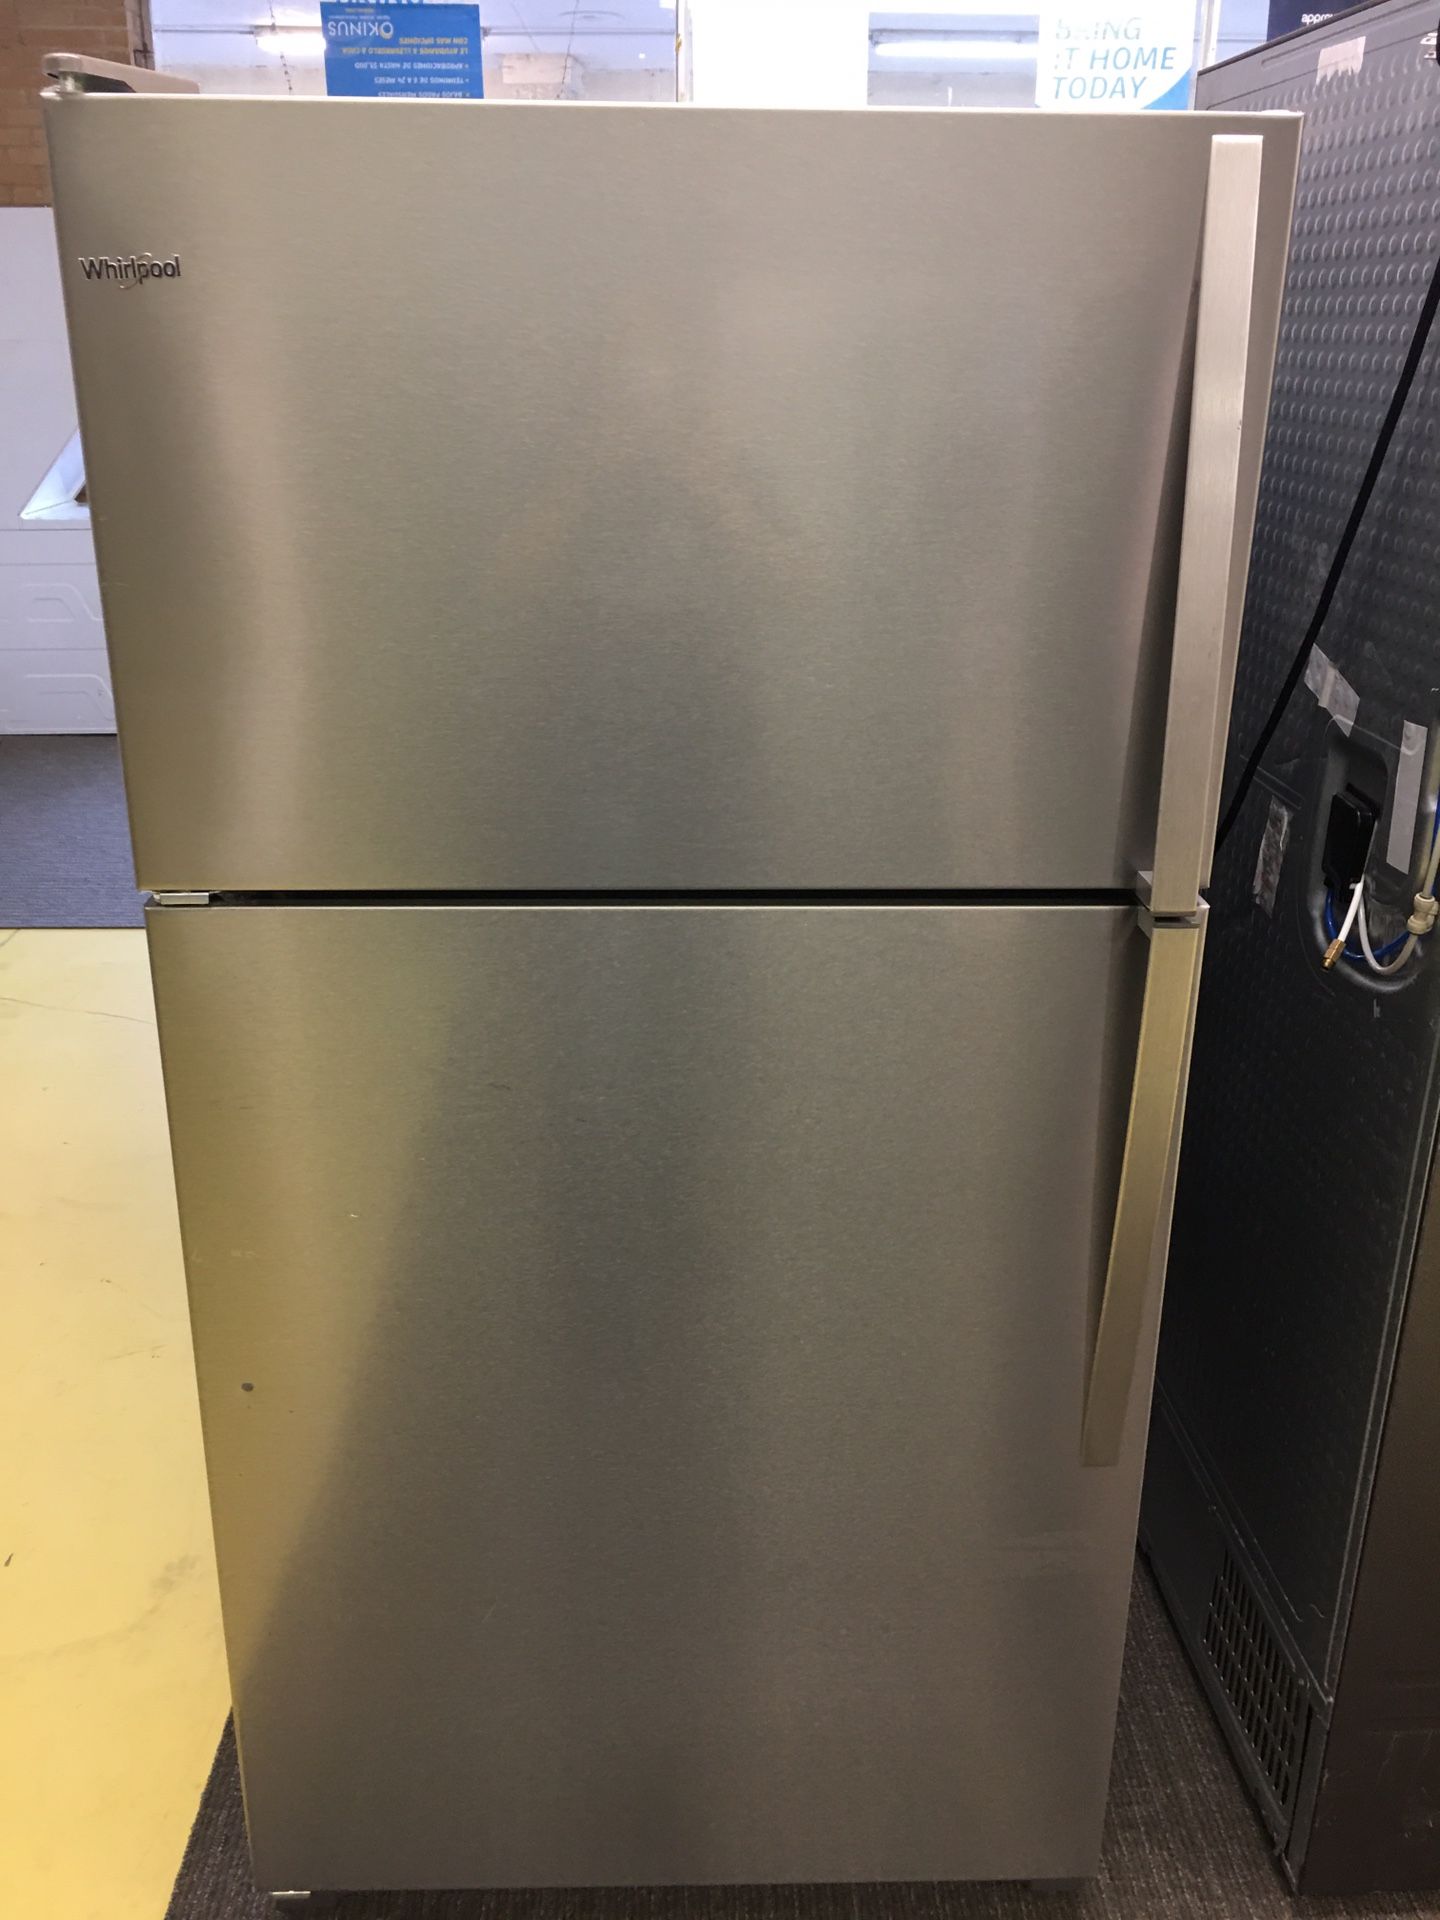 Whirlpool Refrigerator Stainless Steel Top Freezer Scraches Dent With Warranty No Credit Check Just $54 de Enganche You take home Today Cash Price $4